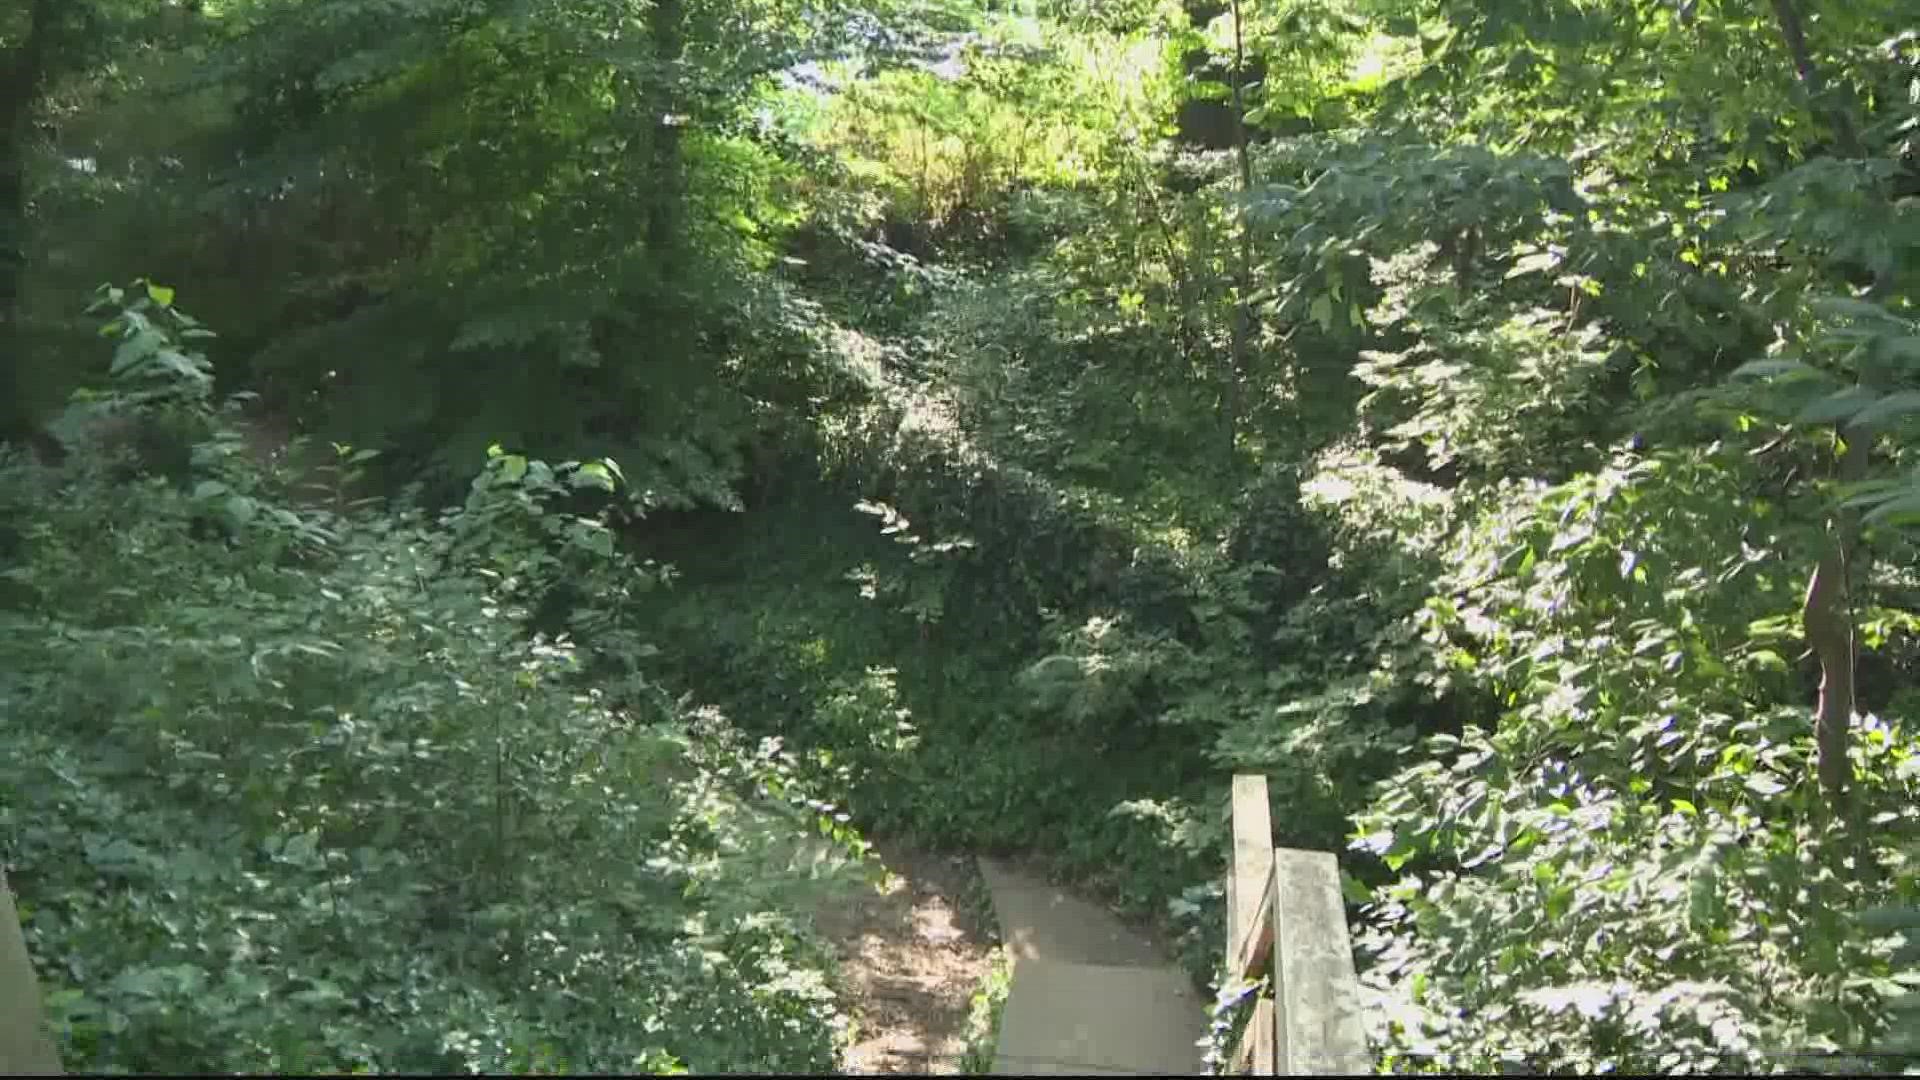 One woman was woken up when a stranger crawled into her bed, the second woman was reportedly knocked unconscious while on a walking trail.